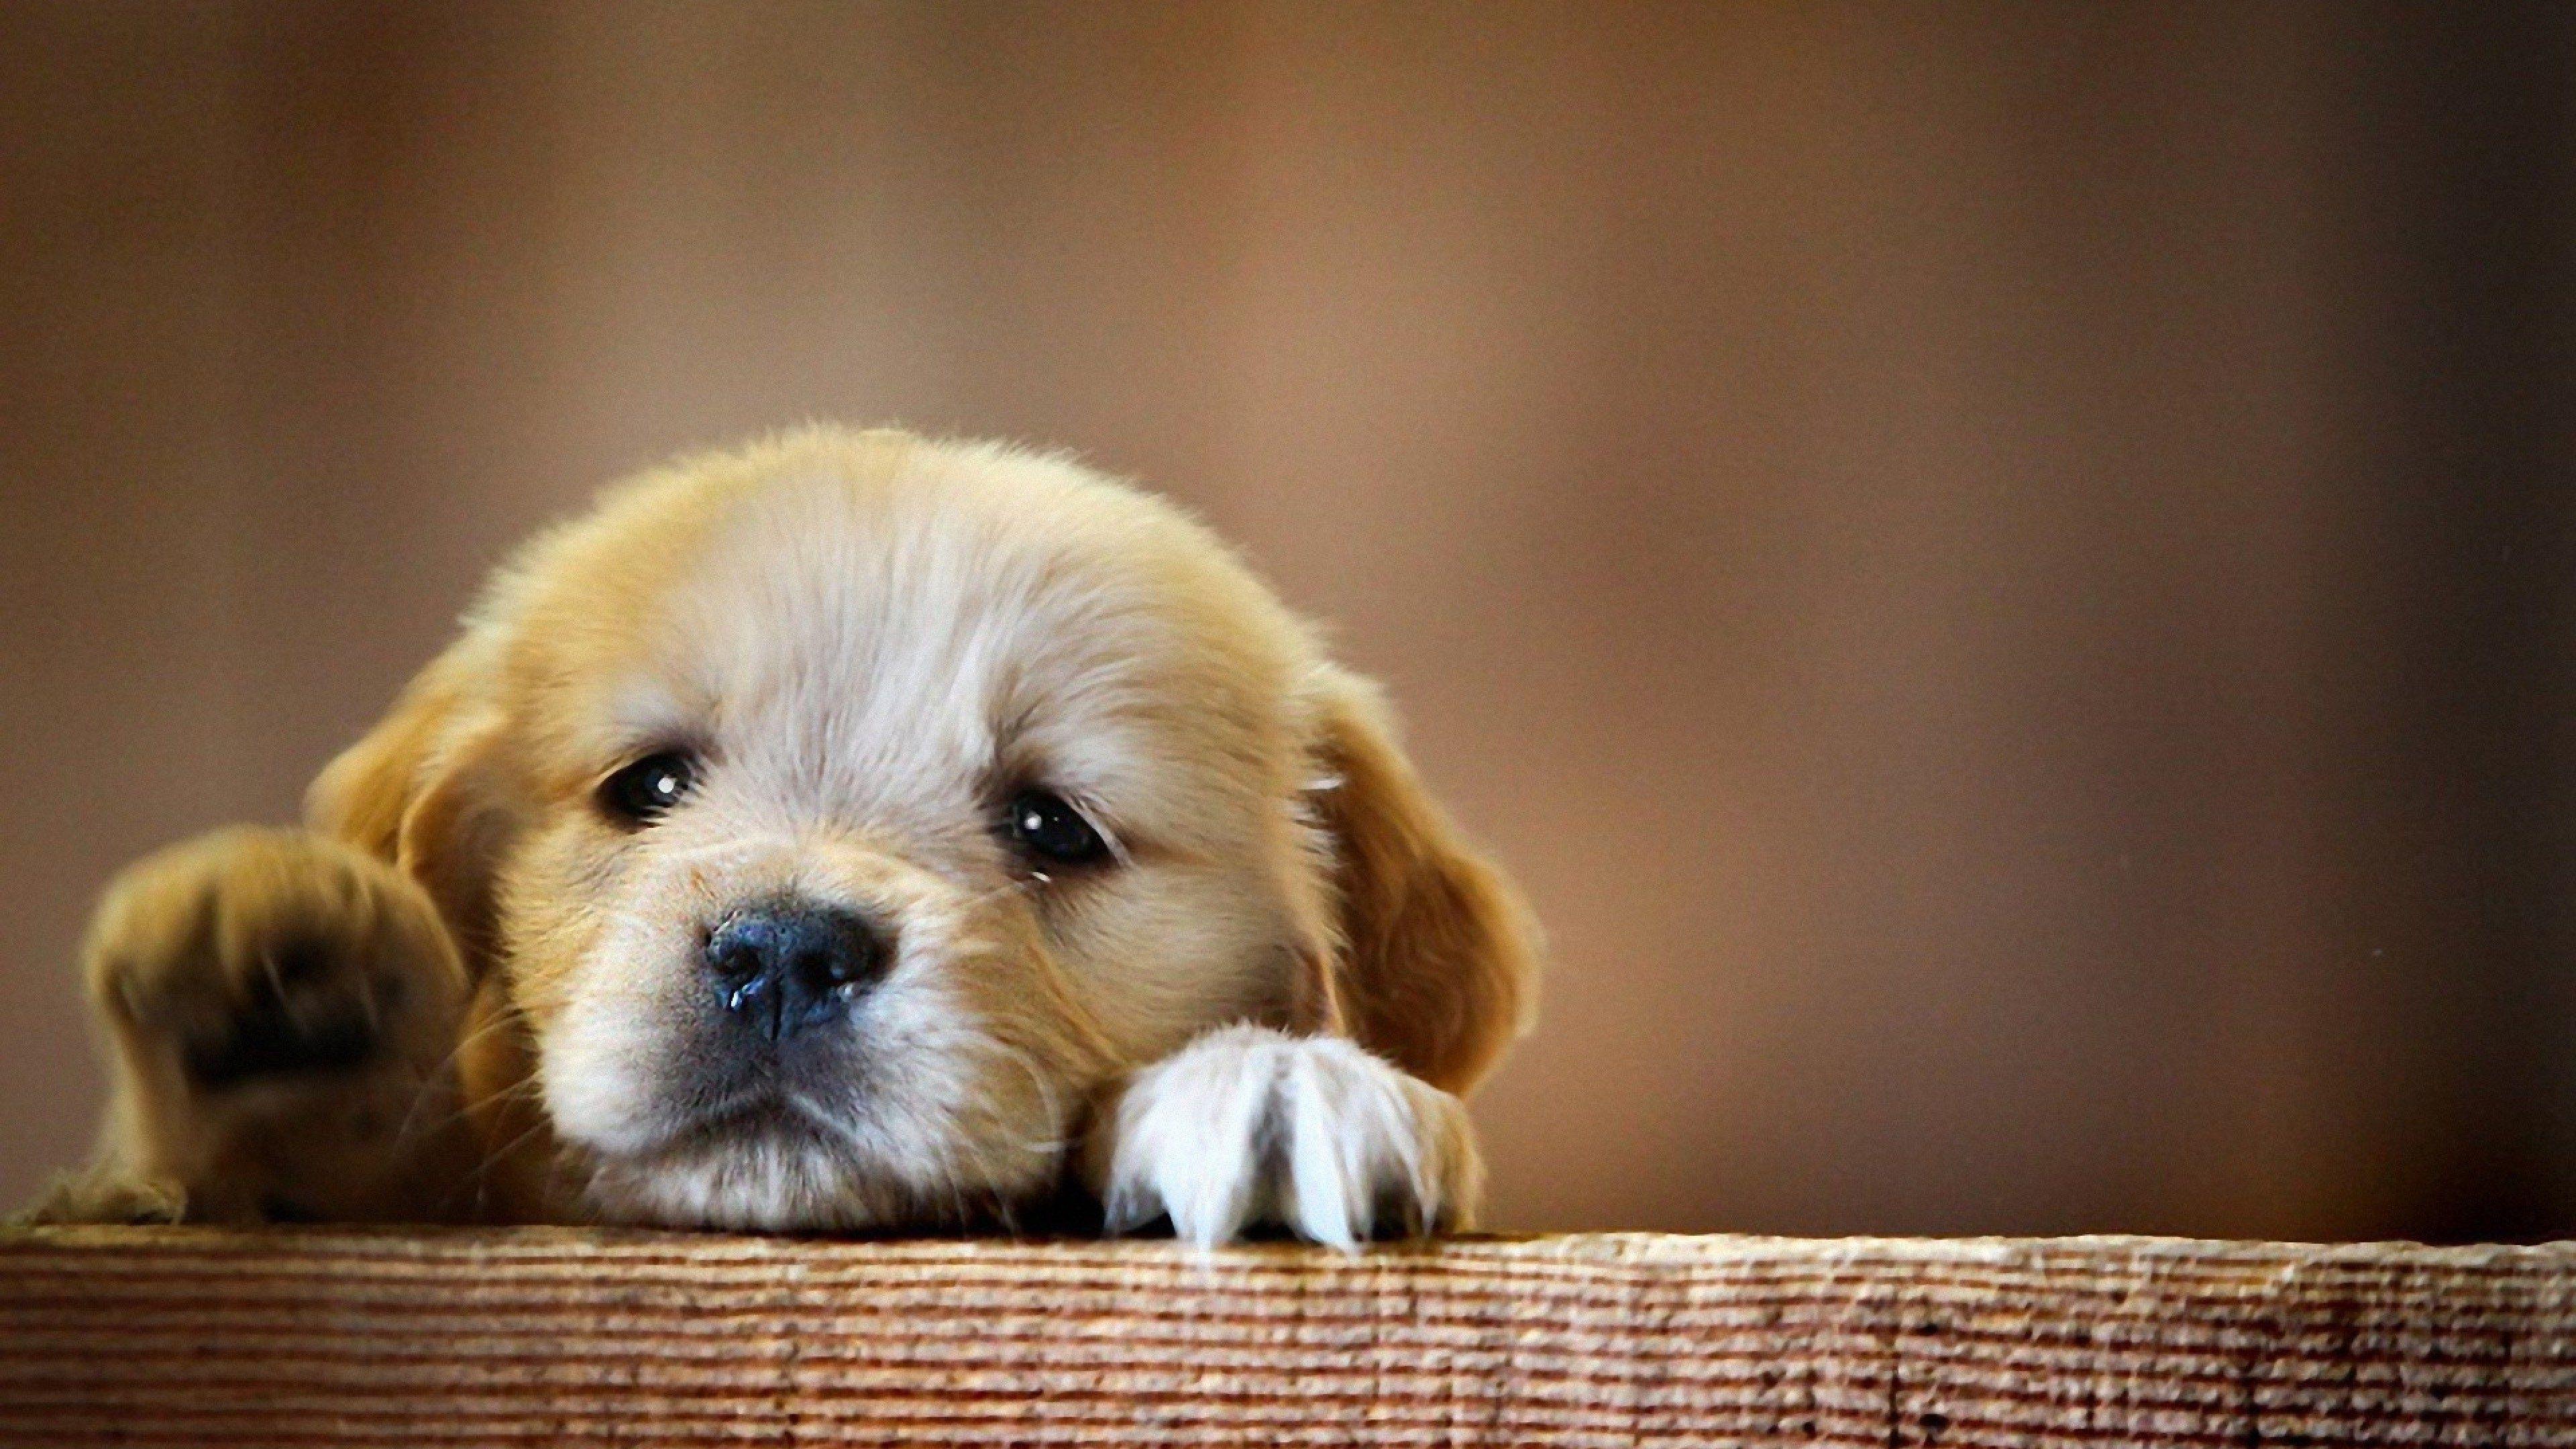 40+ Cute dogs 4k wallpaper For your desktop or phone